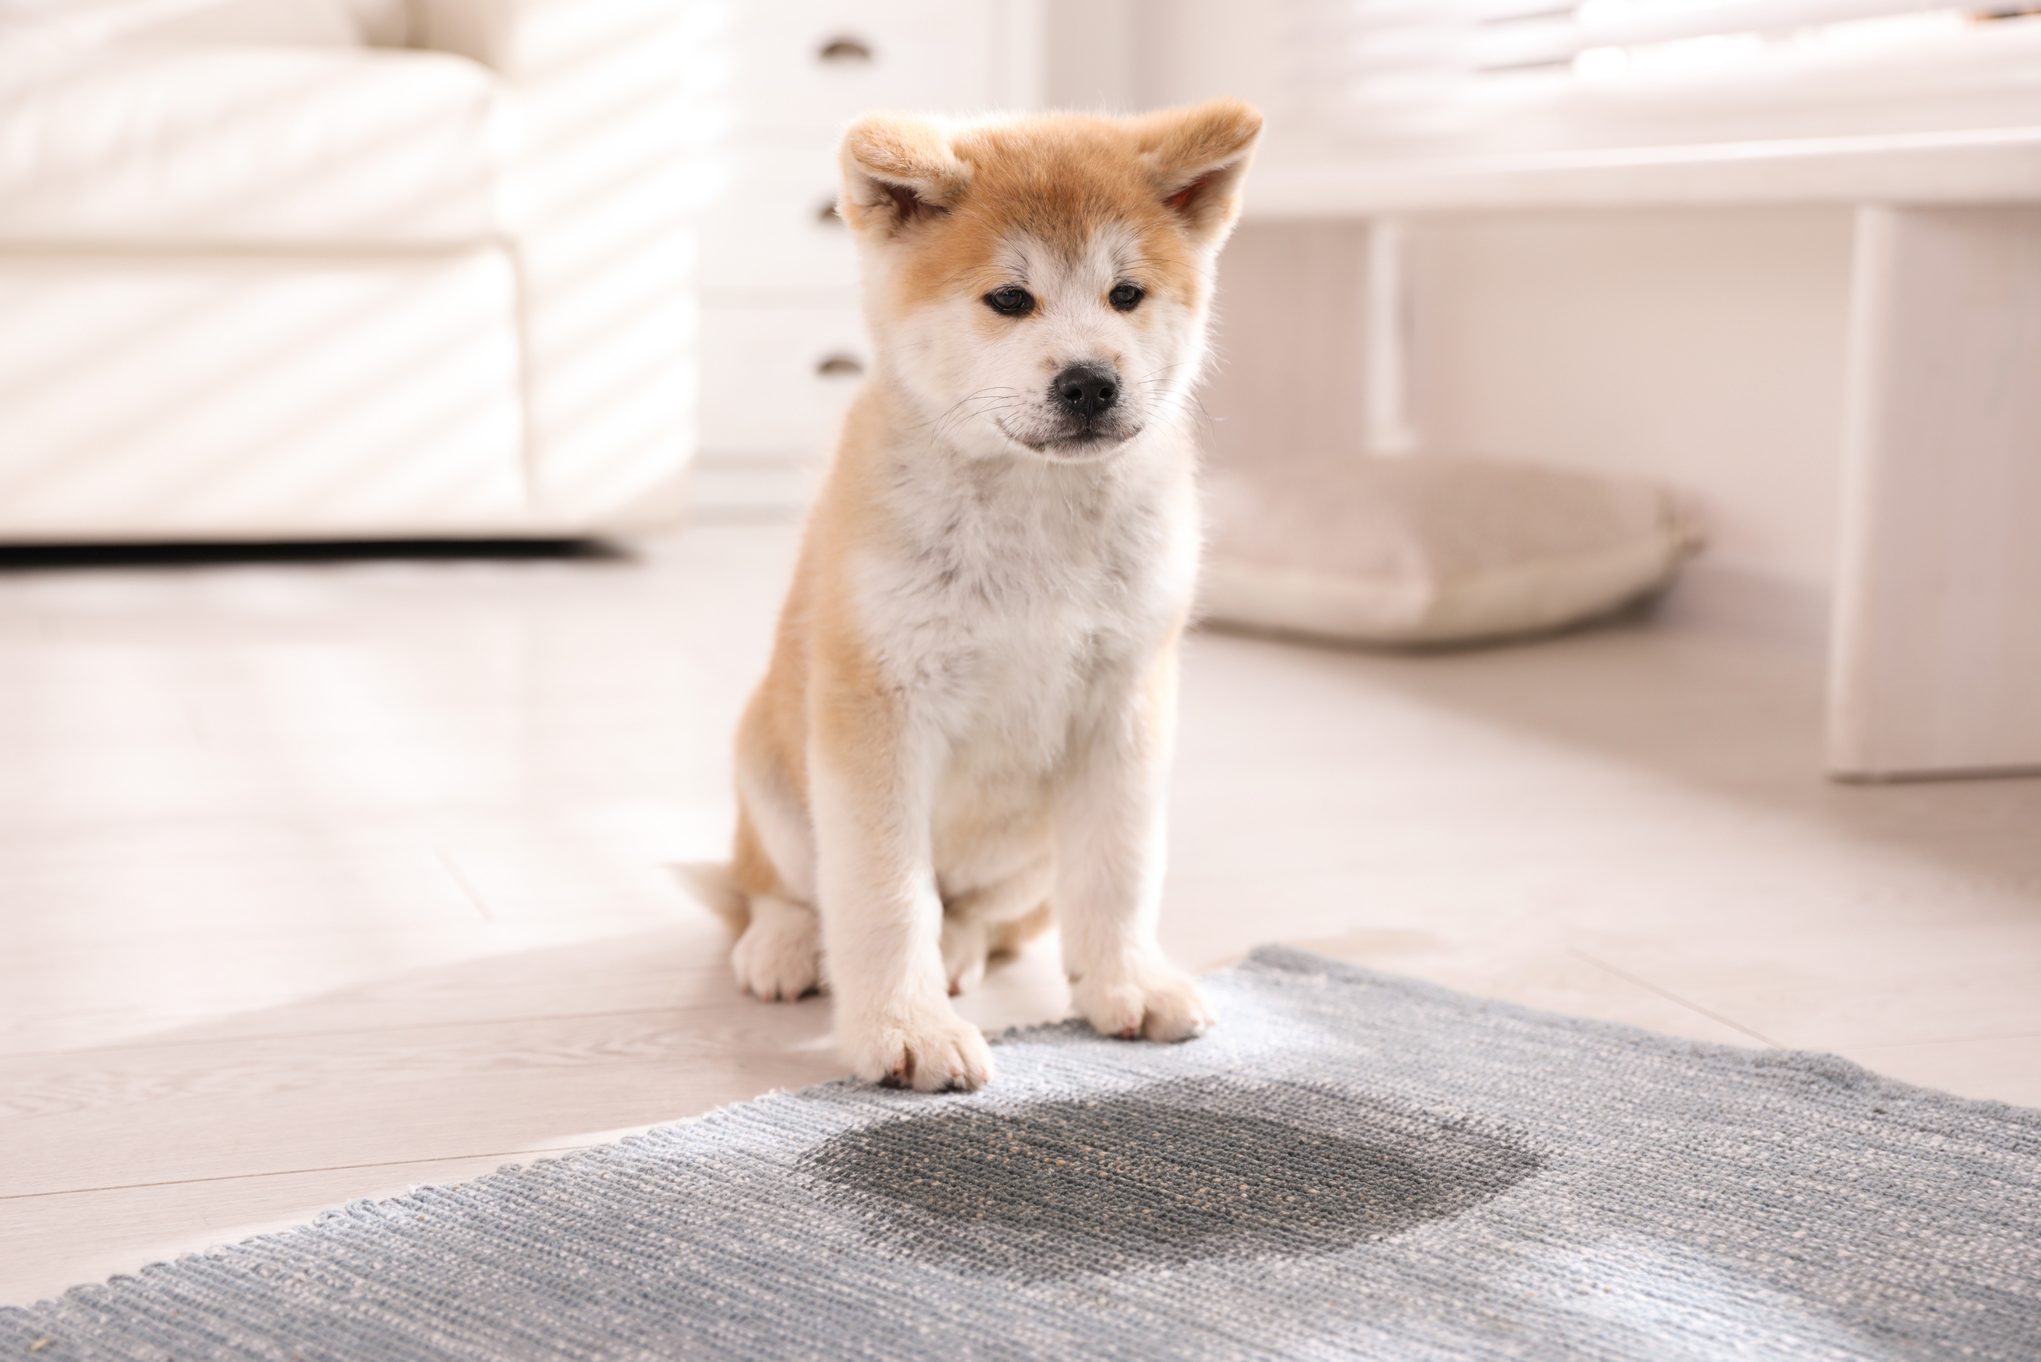 How To Clean Rug With Dog Urine